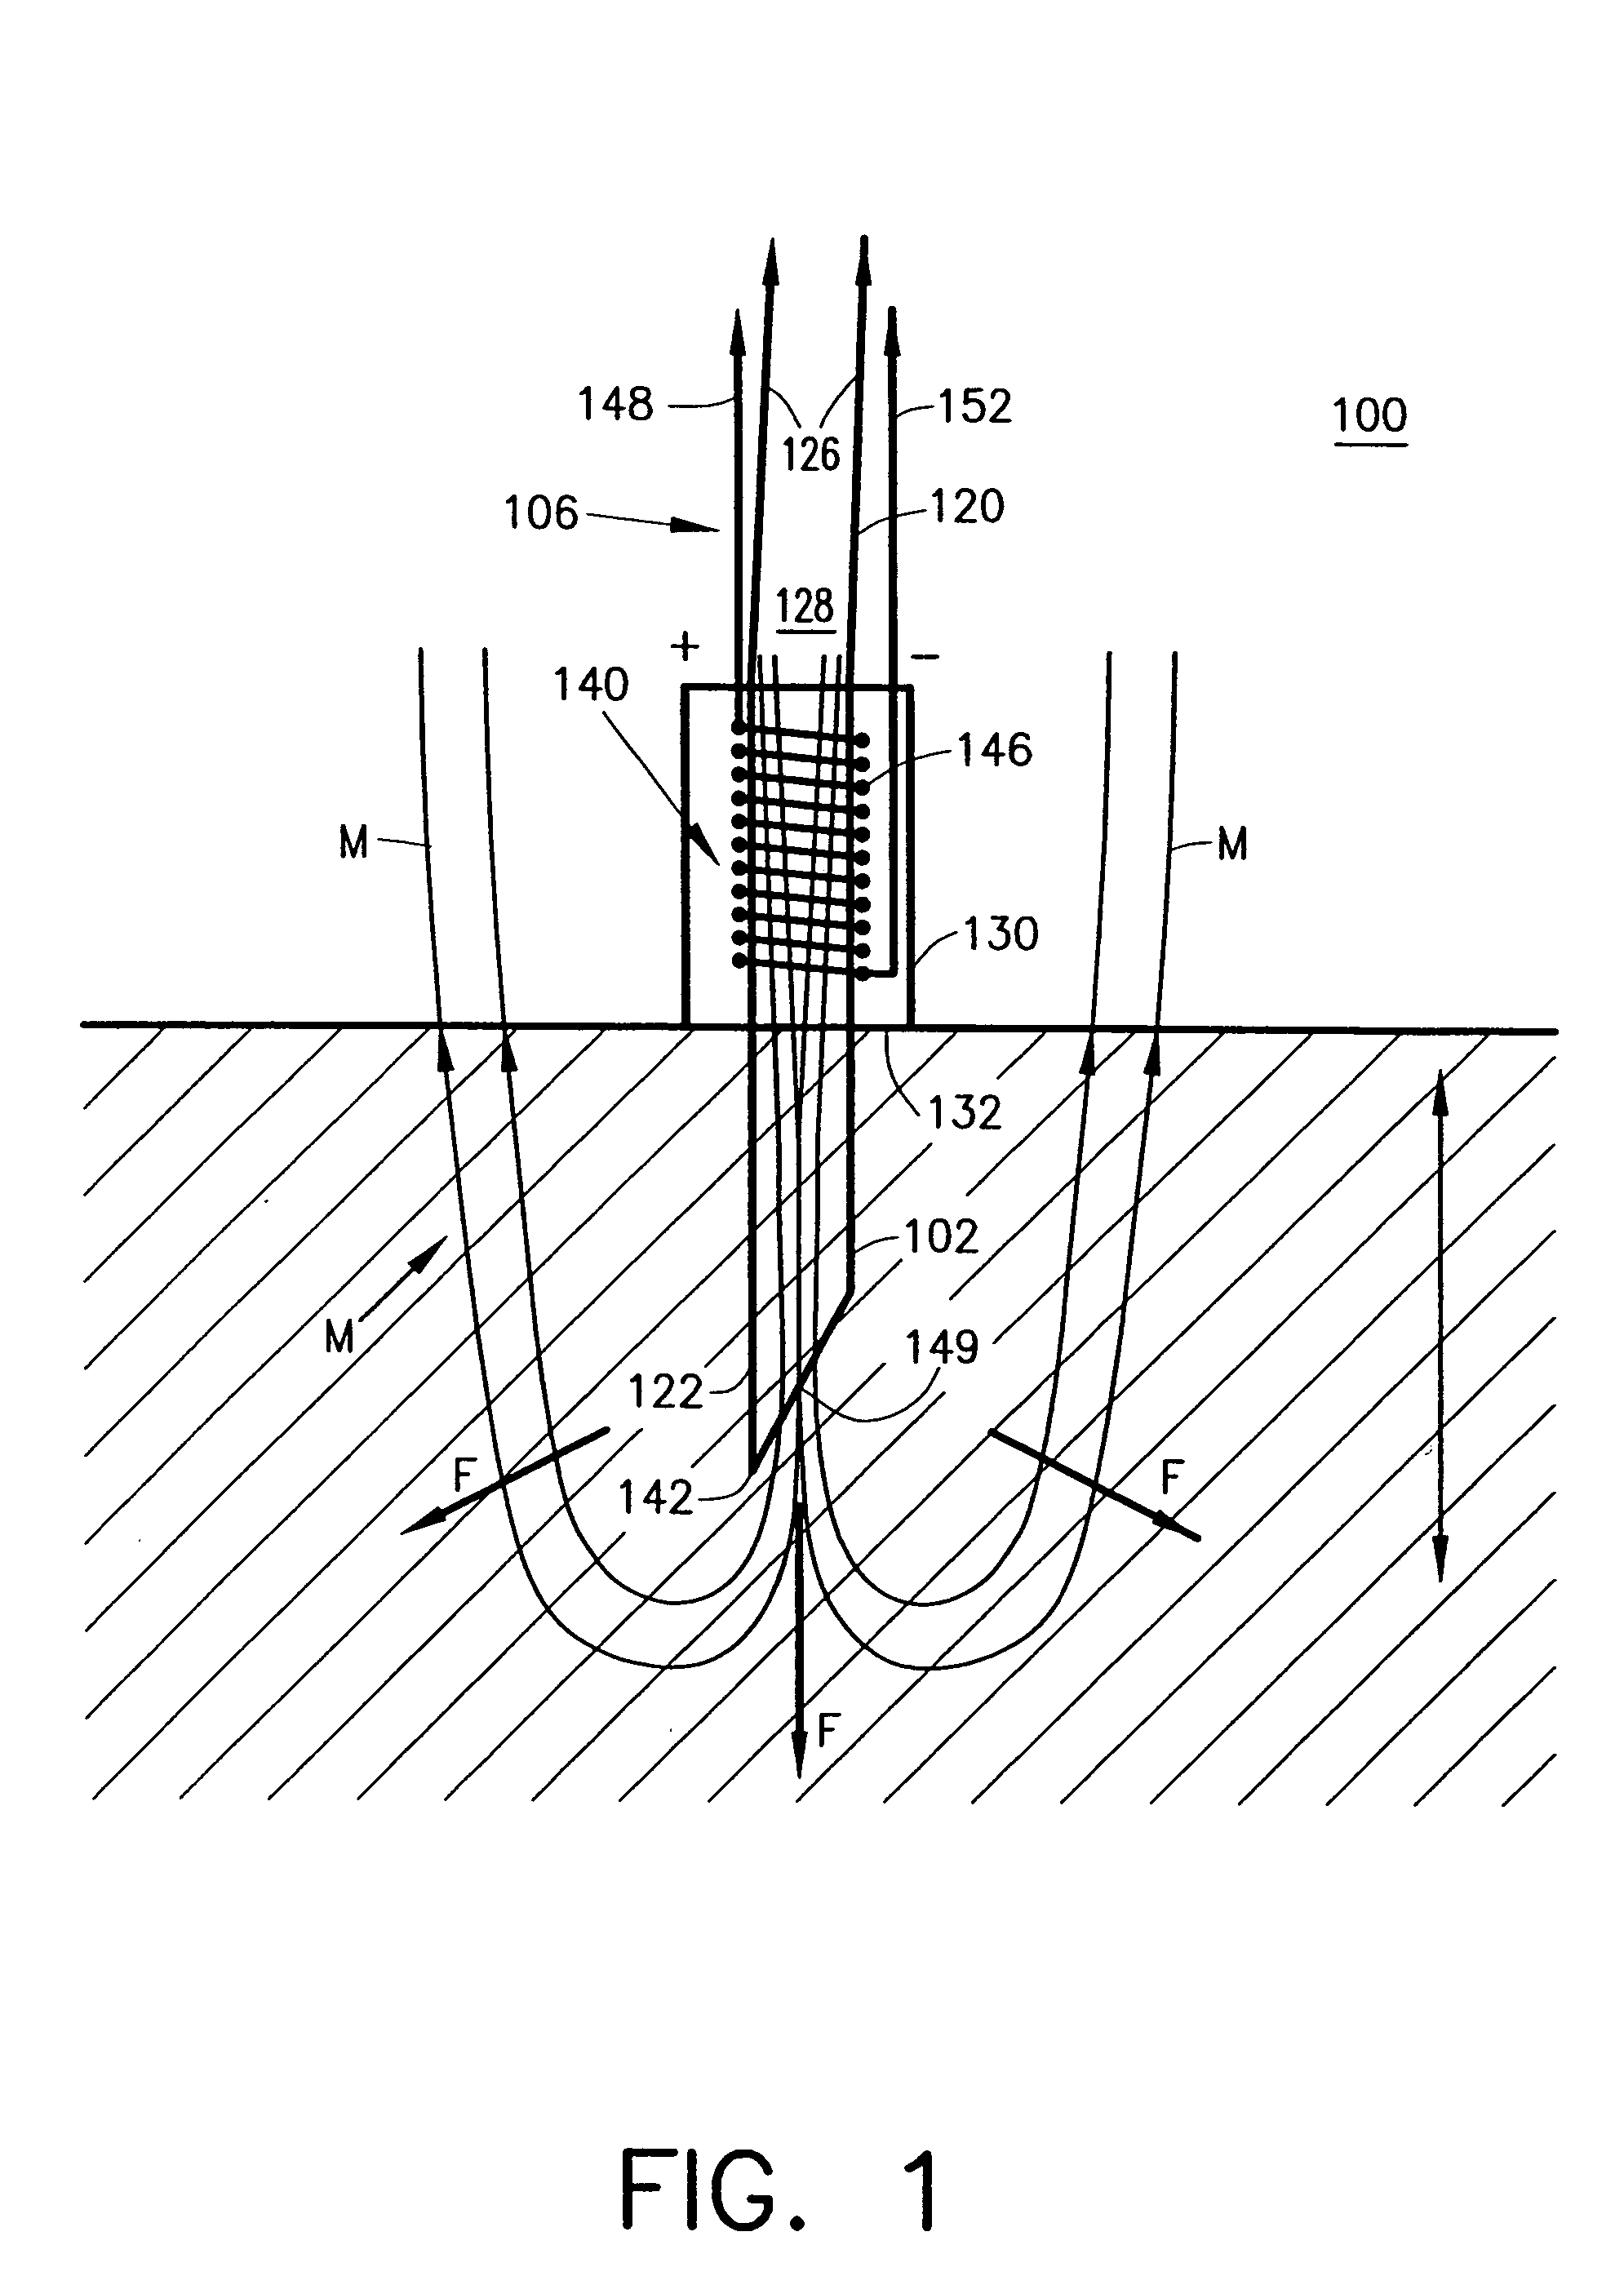 Magnetically enhanced injection catheter